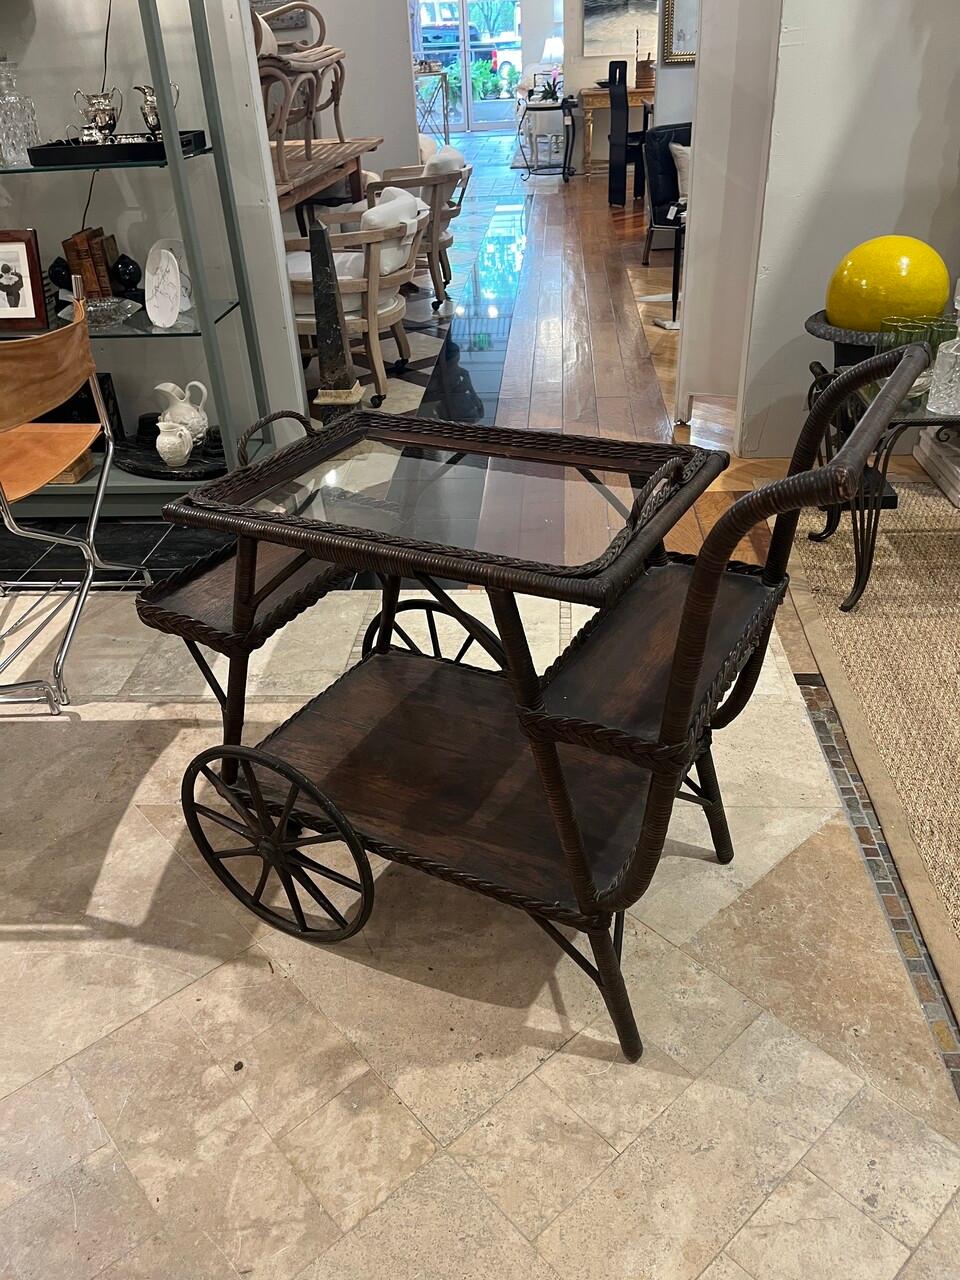 Transport yourself to the elegant gatherings of the early 20th century with this exquisite Heywood Wakefield wicker bar/tea cart. Crafted with timeless sophistication, it features intricate wicker weaving and a removable serving tray, combining